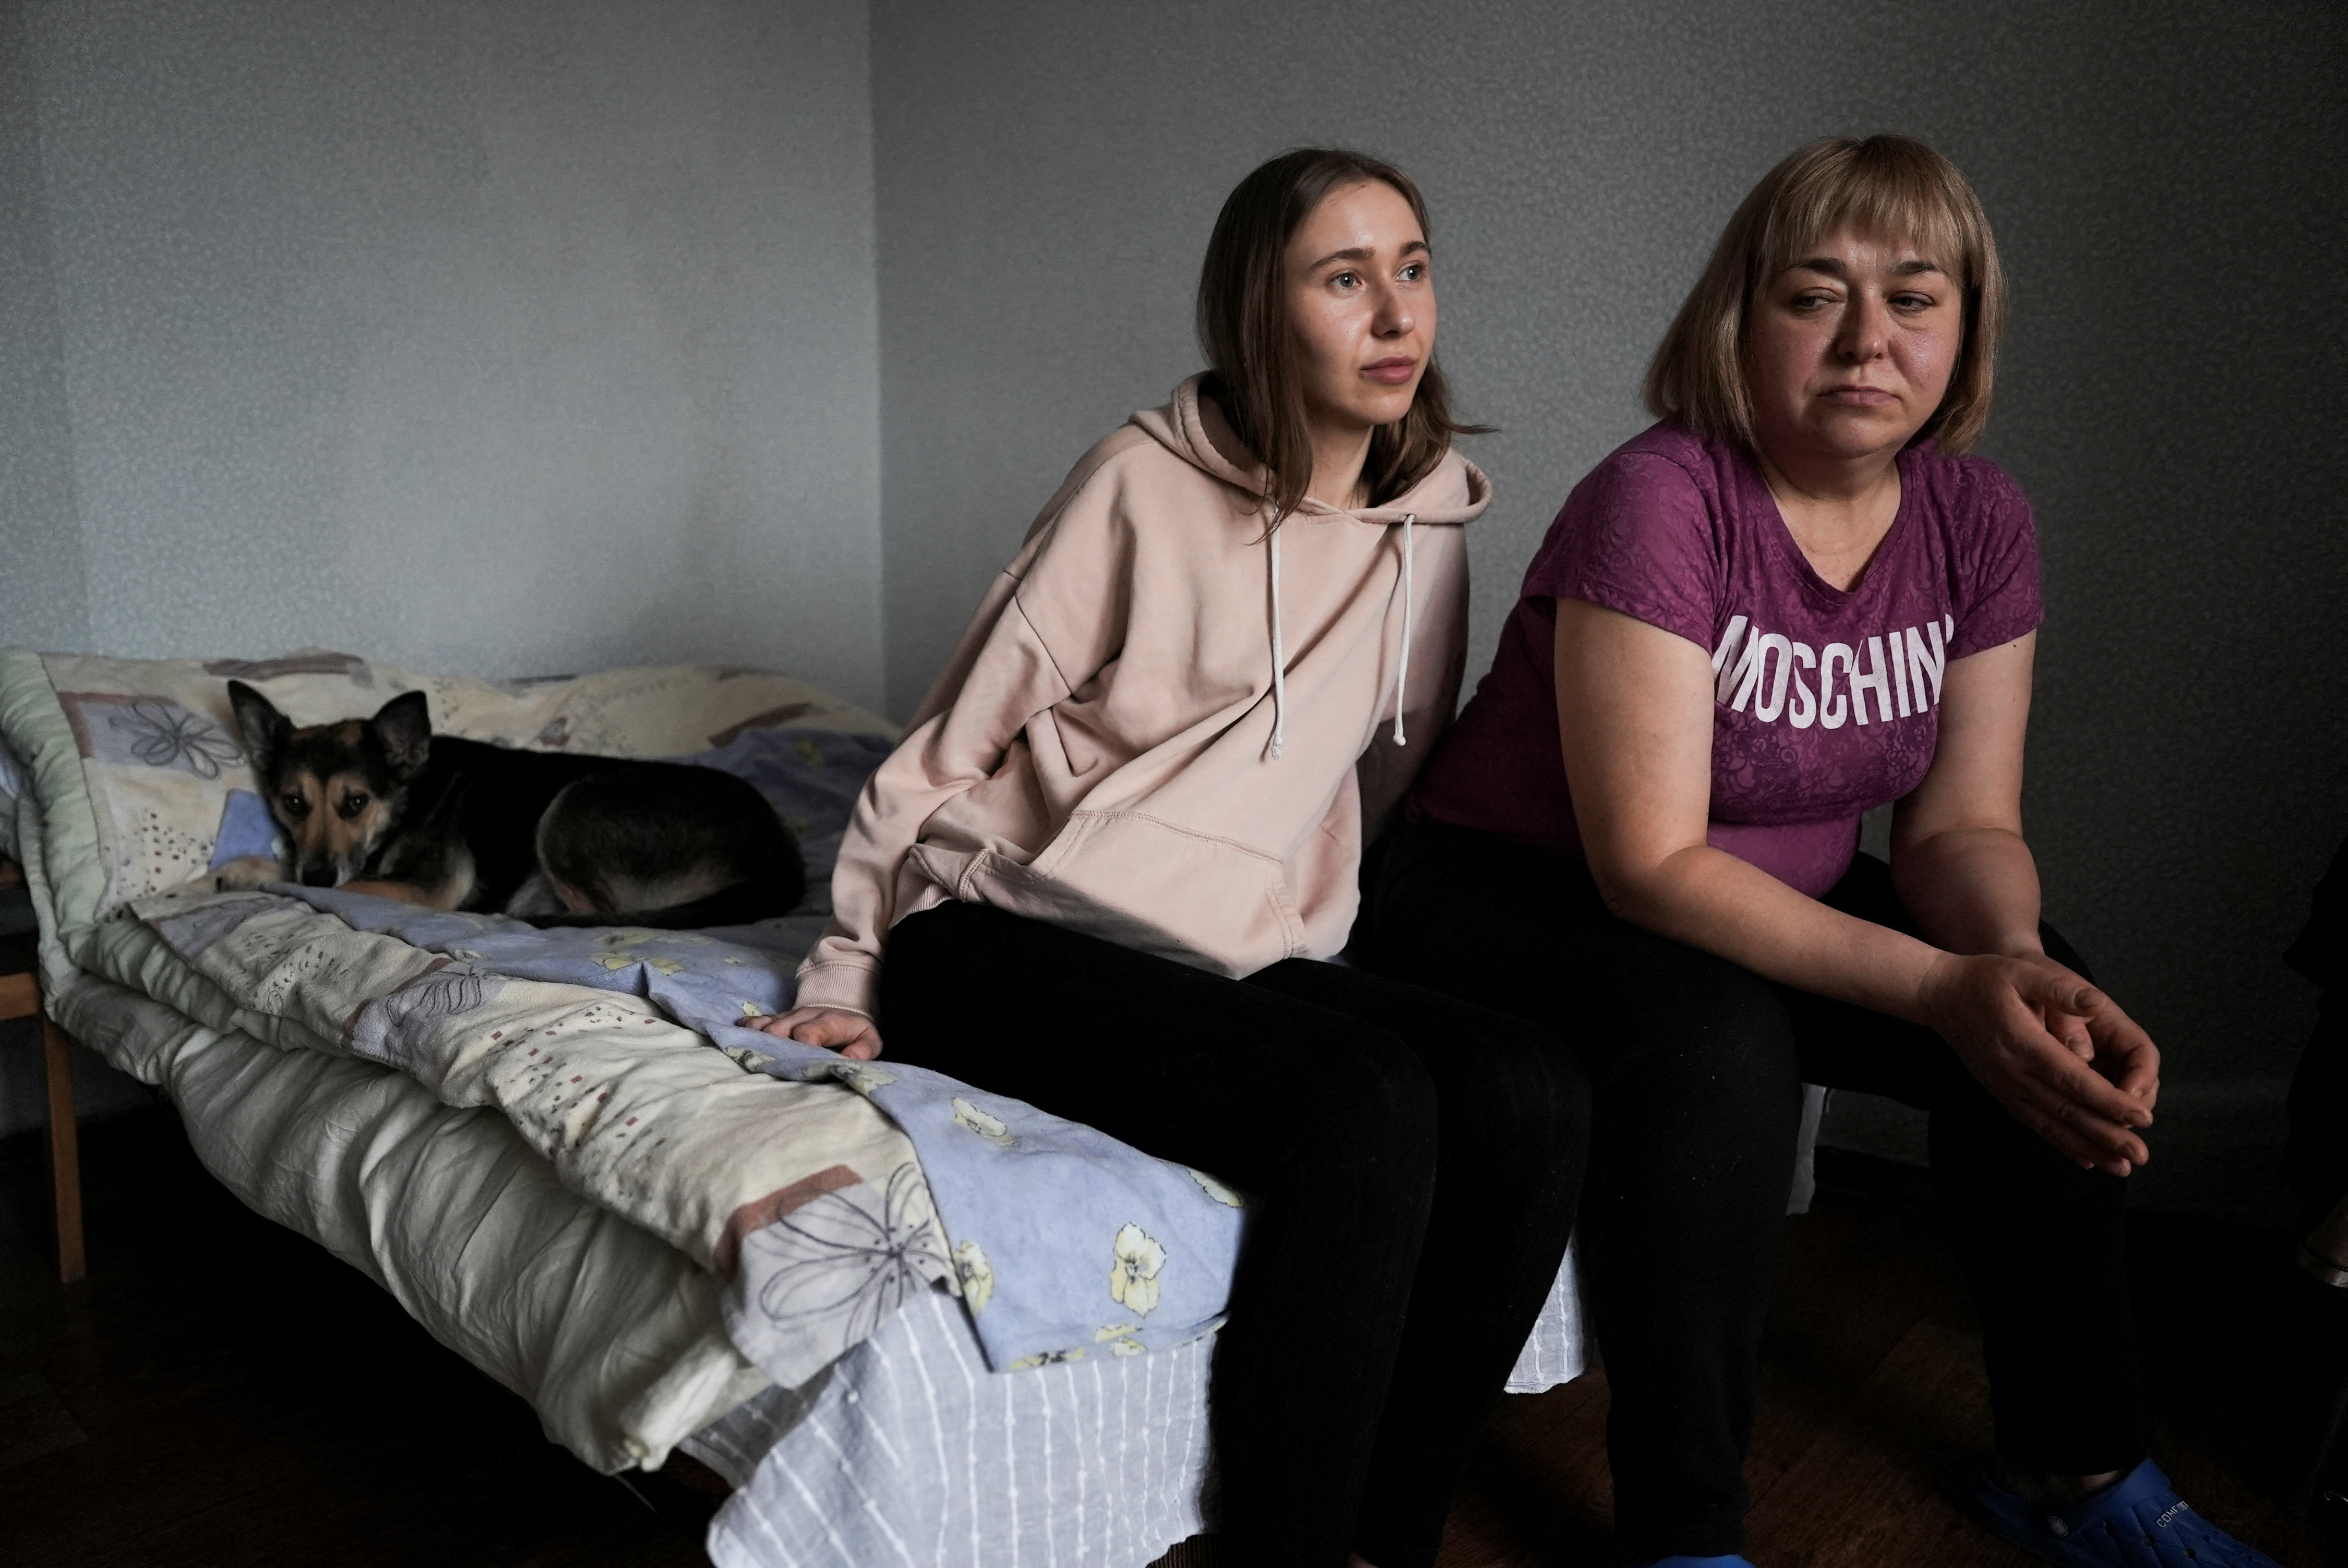 Ukrainian women tell of beatings and threats under Russian occupation after escaping to Kyiv